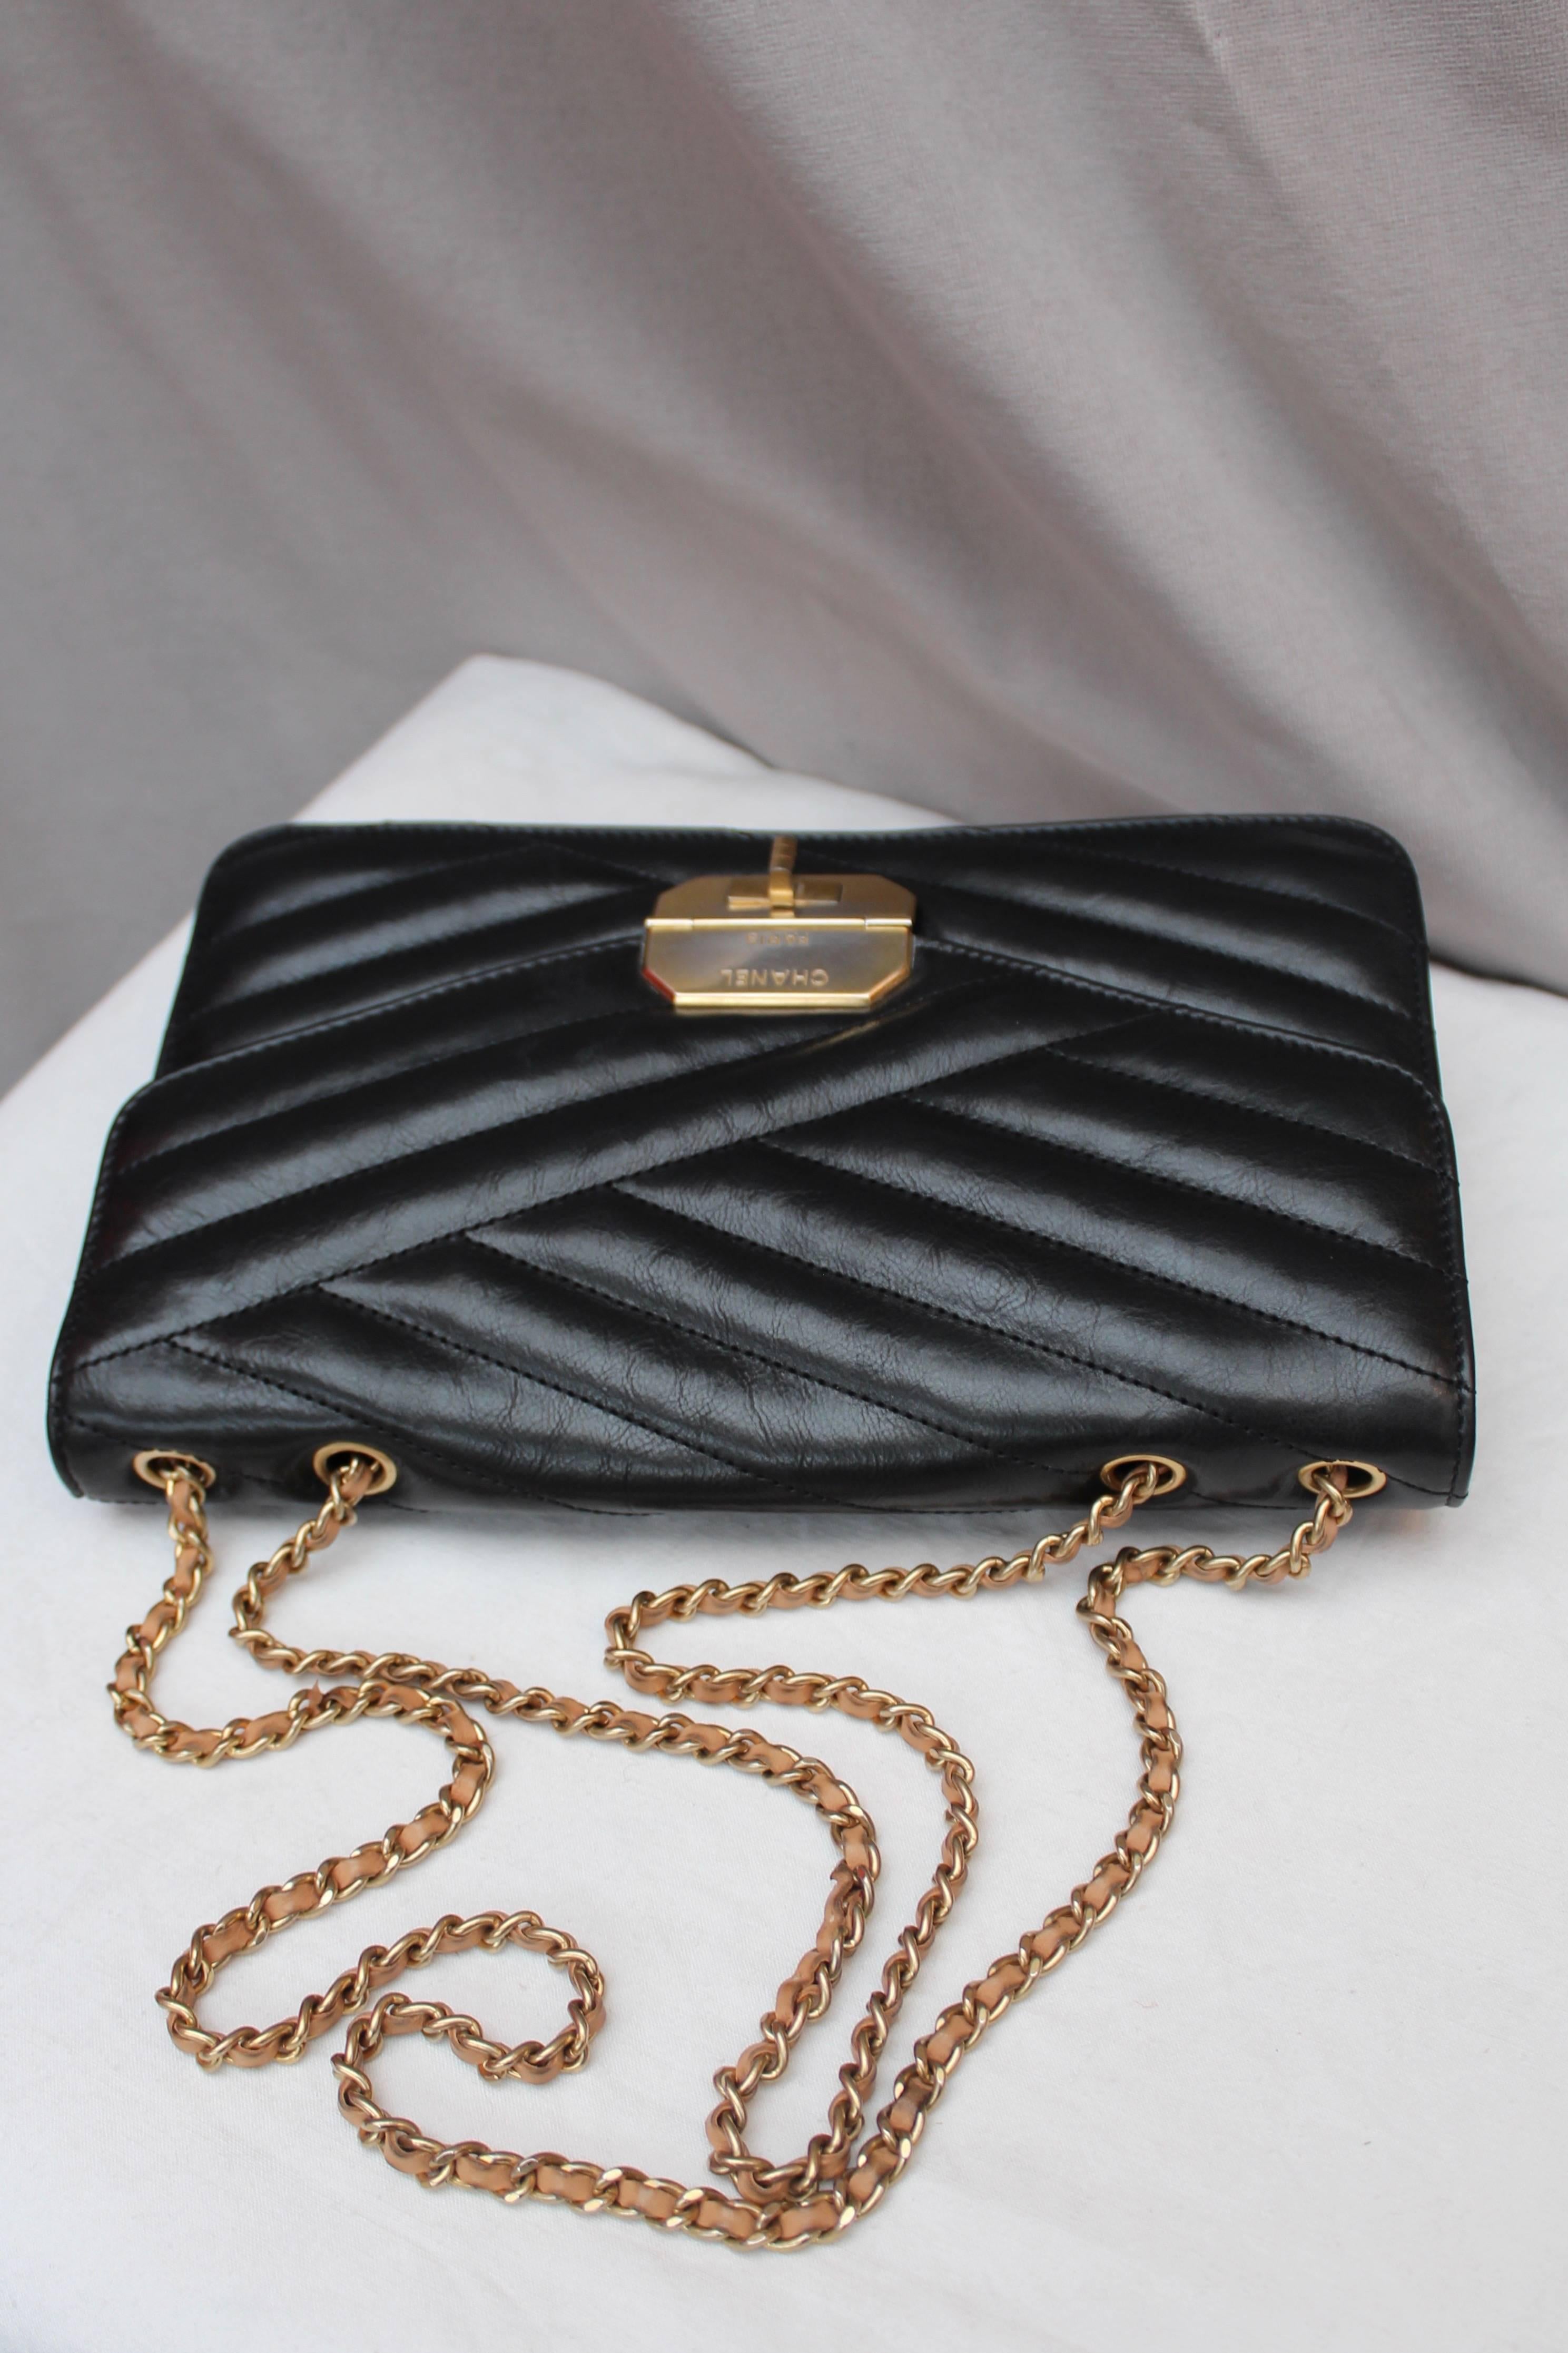 Chanel quilted black leather bag 2